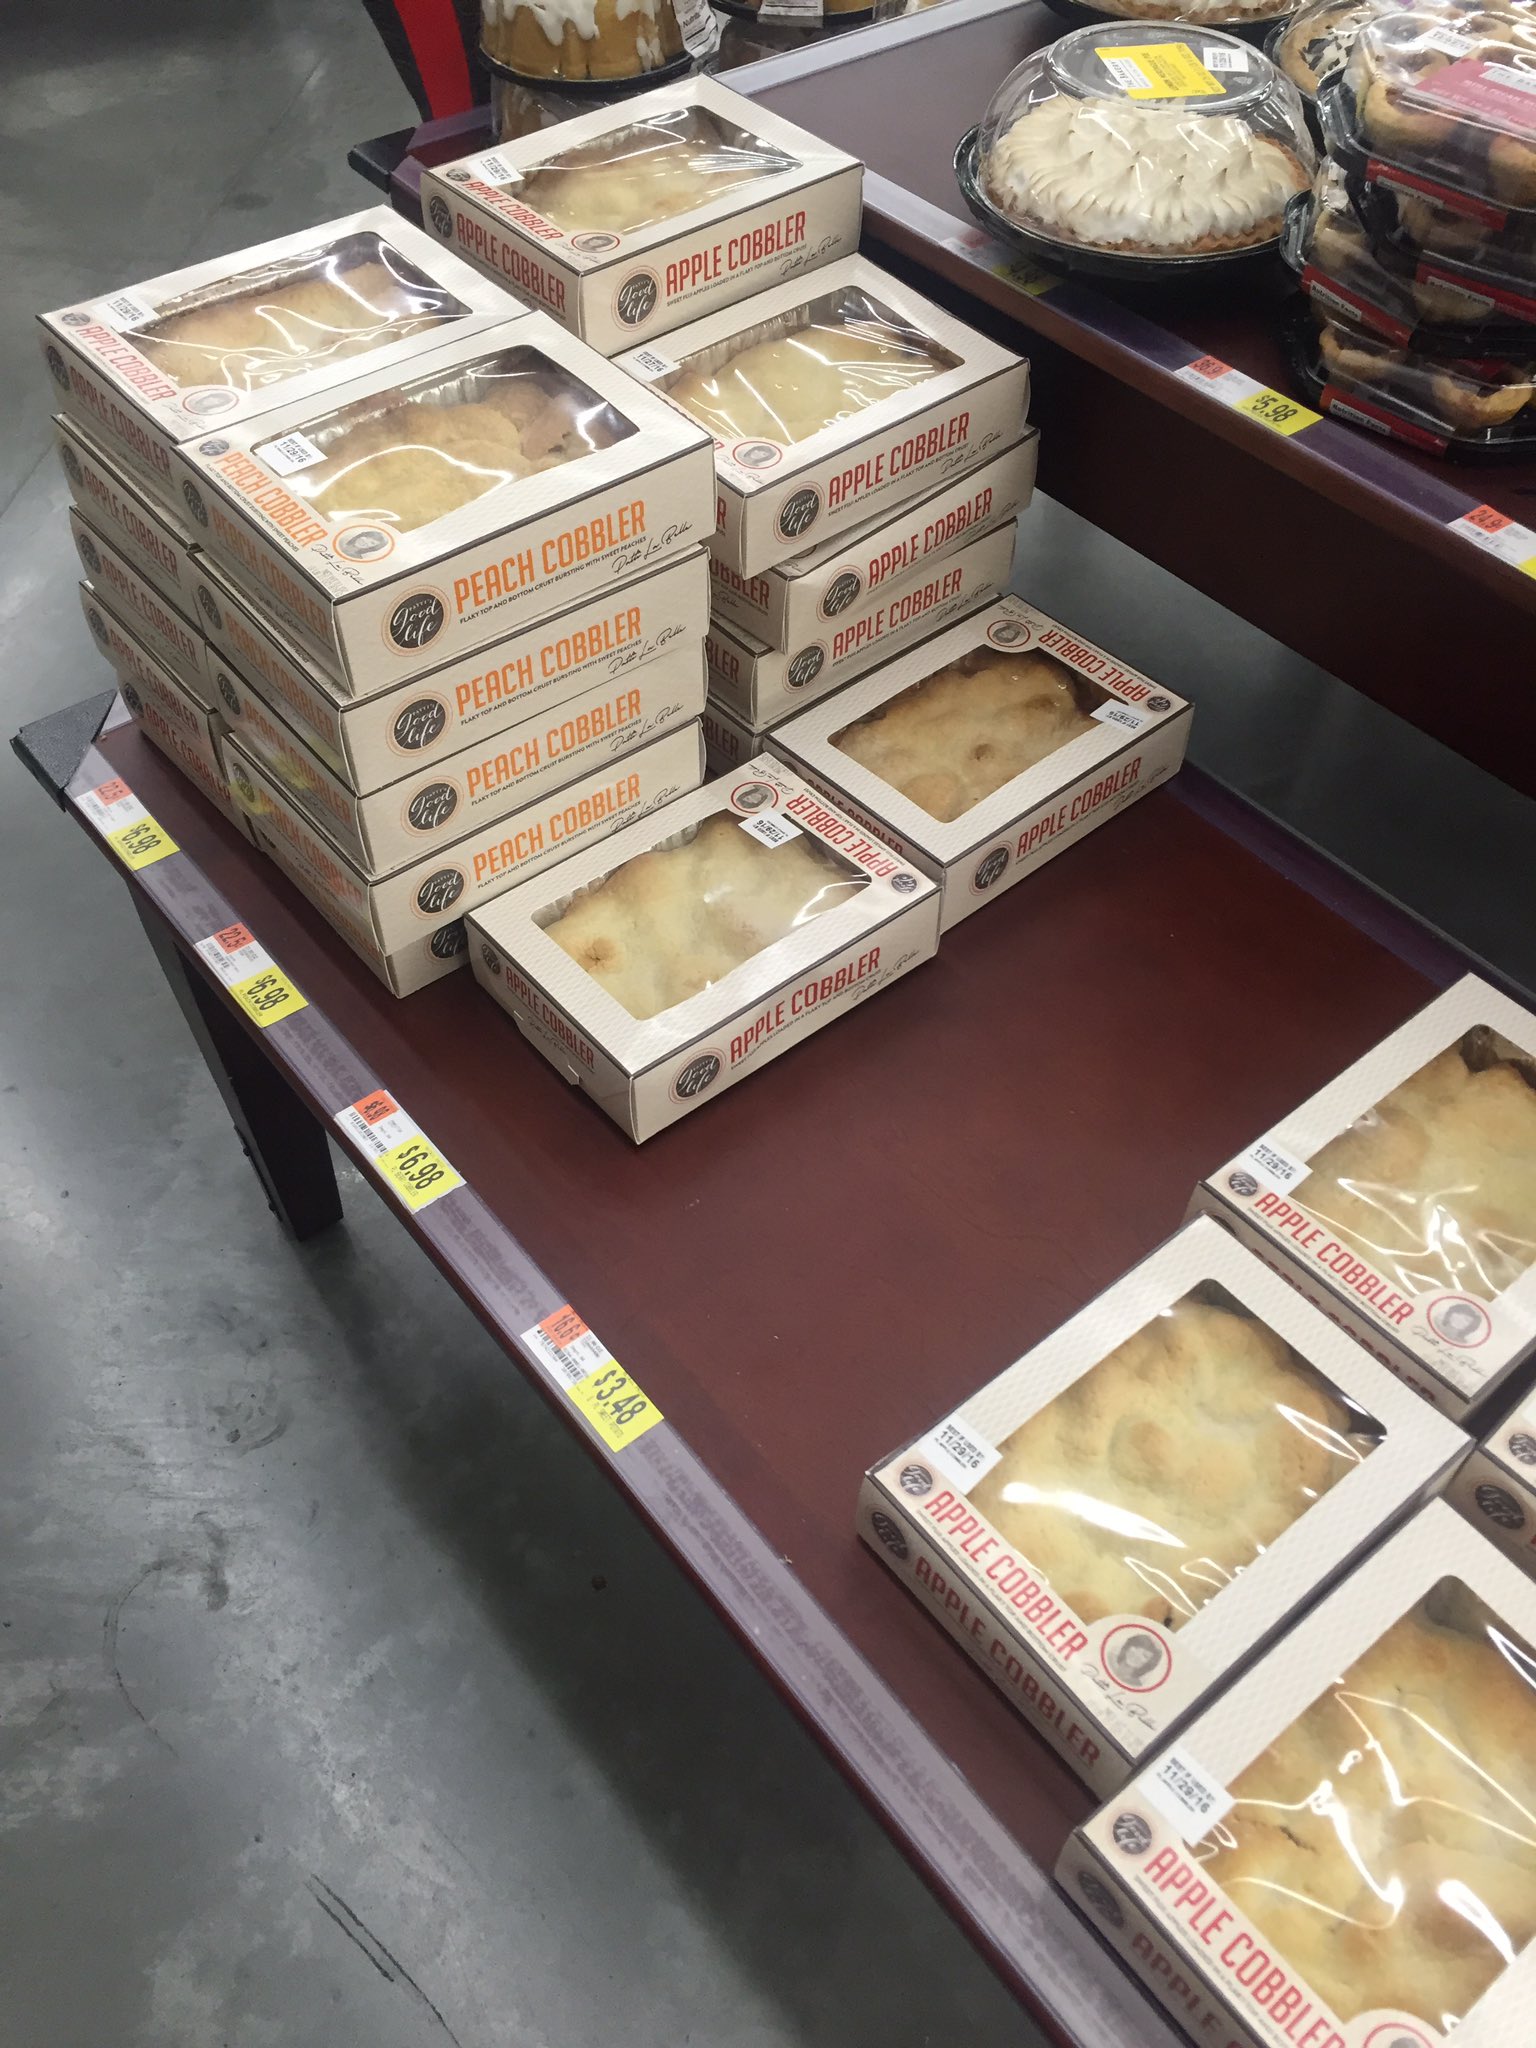 Post Hipster Runoff Altbaguette Walmart Is Out Here Playing Games With The Patti Labelle Pies They Should Have Pies On Deck For Thanksgiving T Co Lnamjczxay Twitter